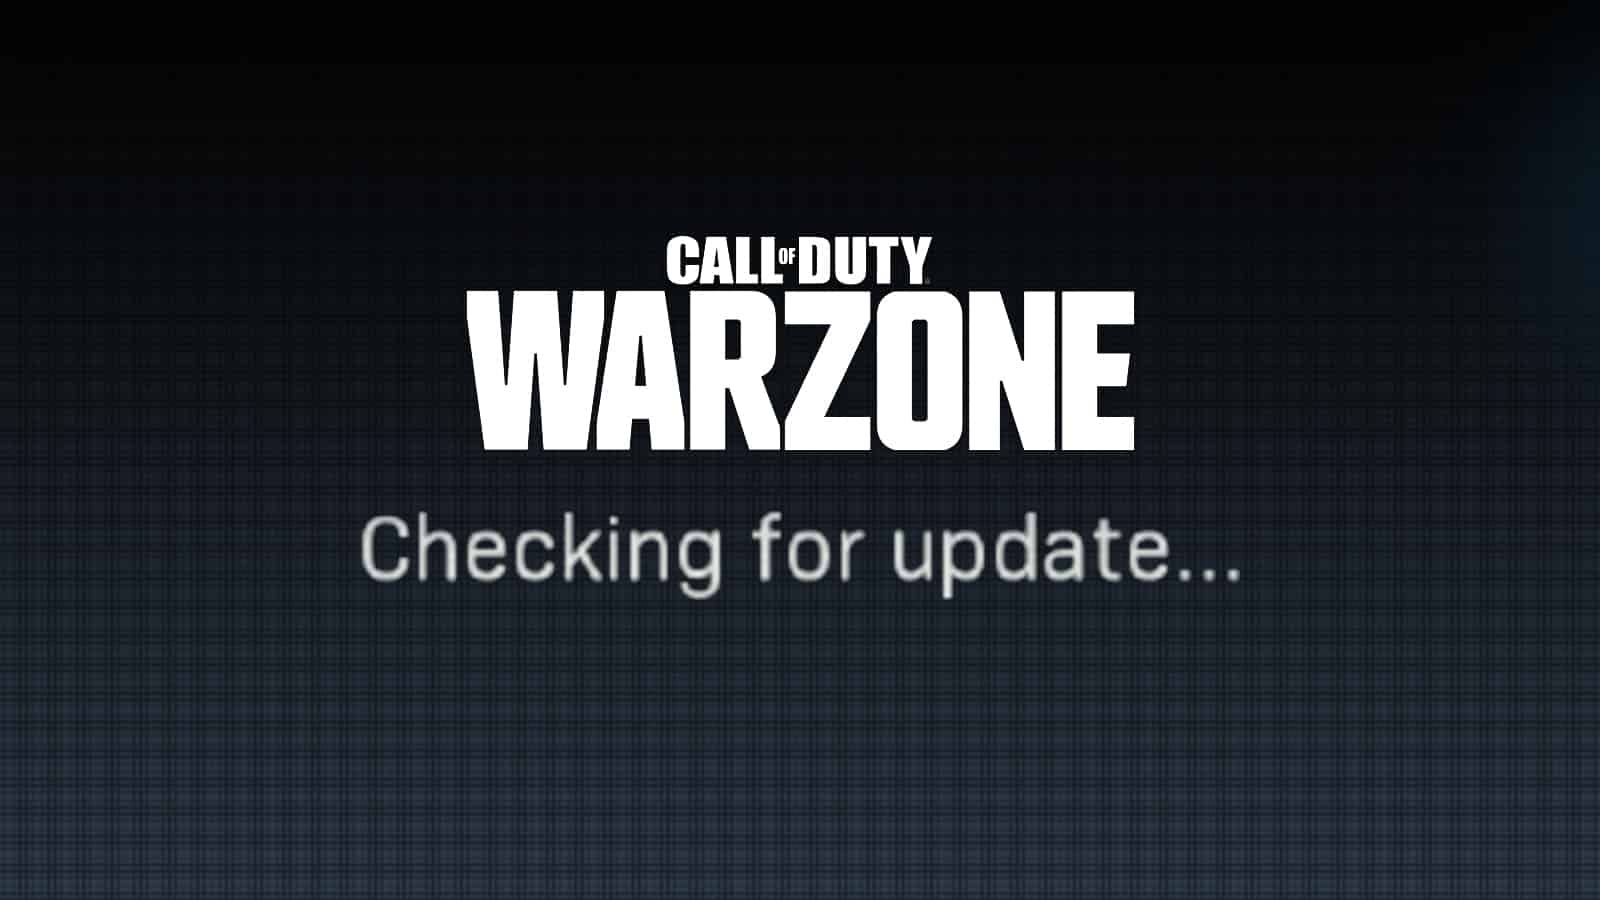 Warzone checking for update bug fix